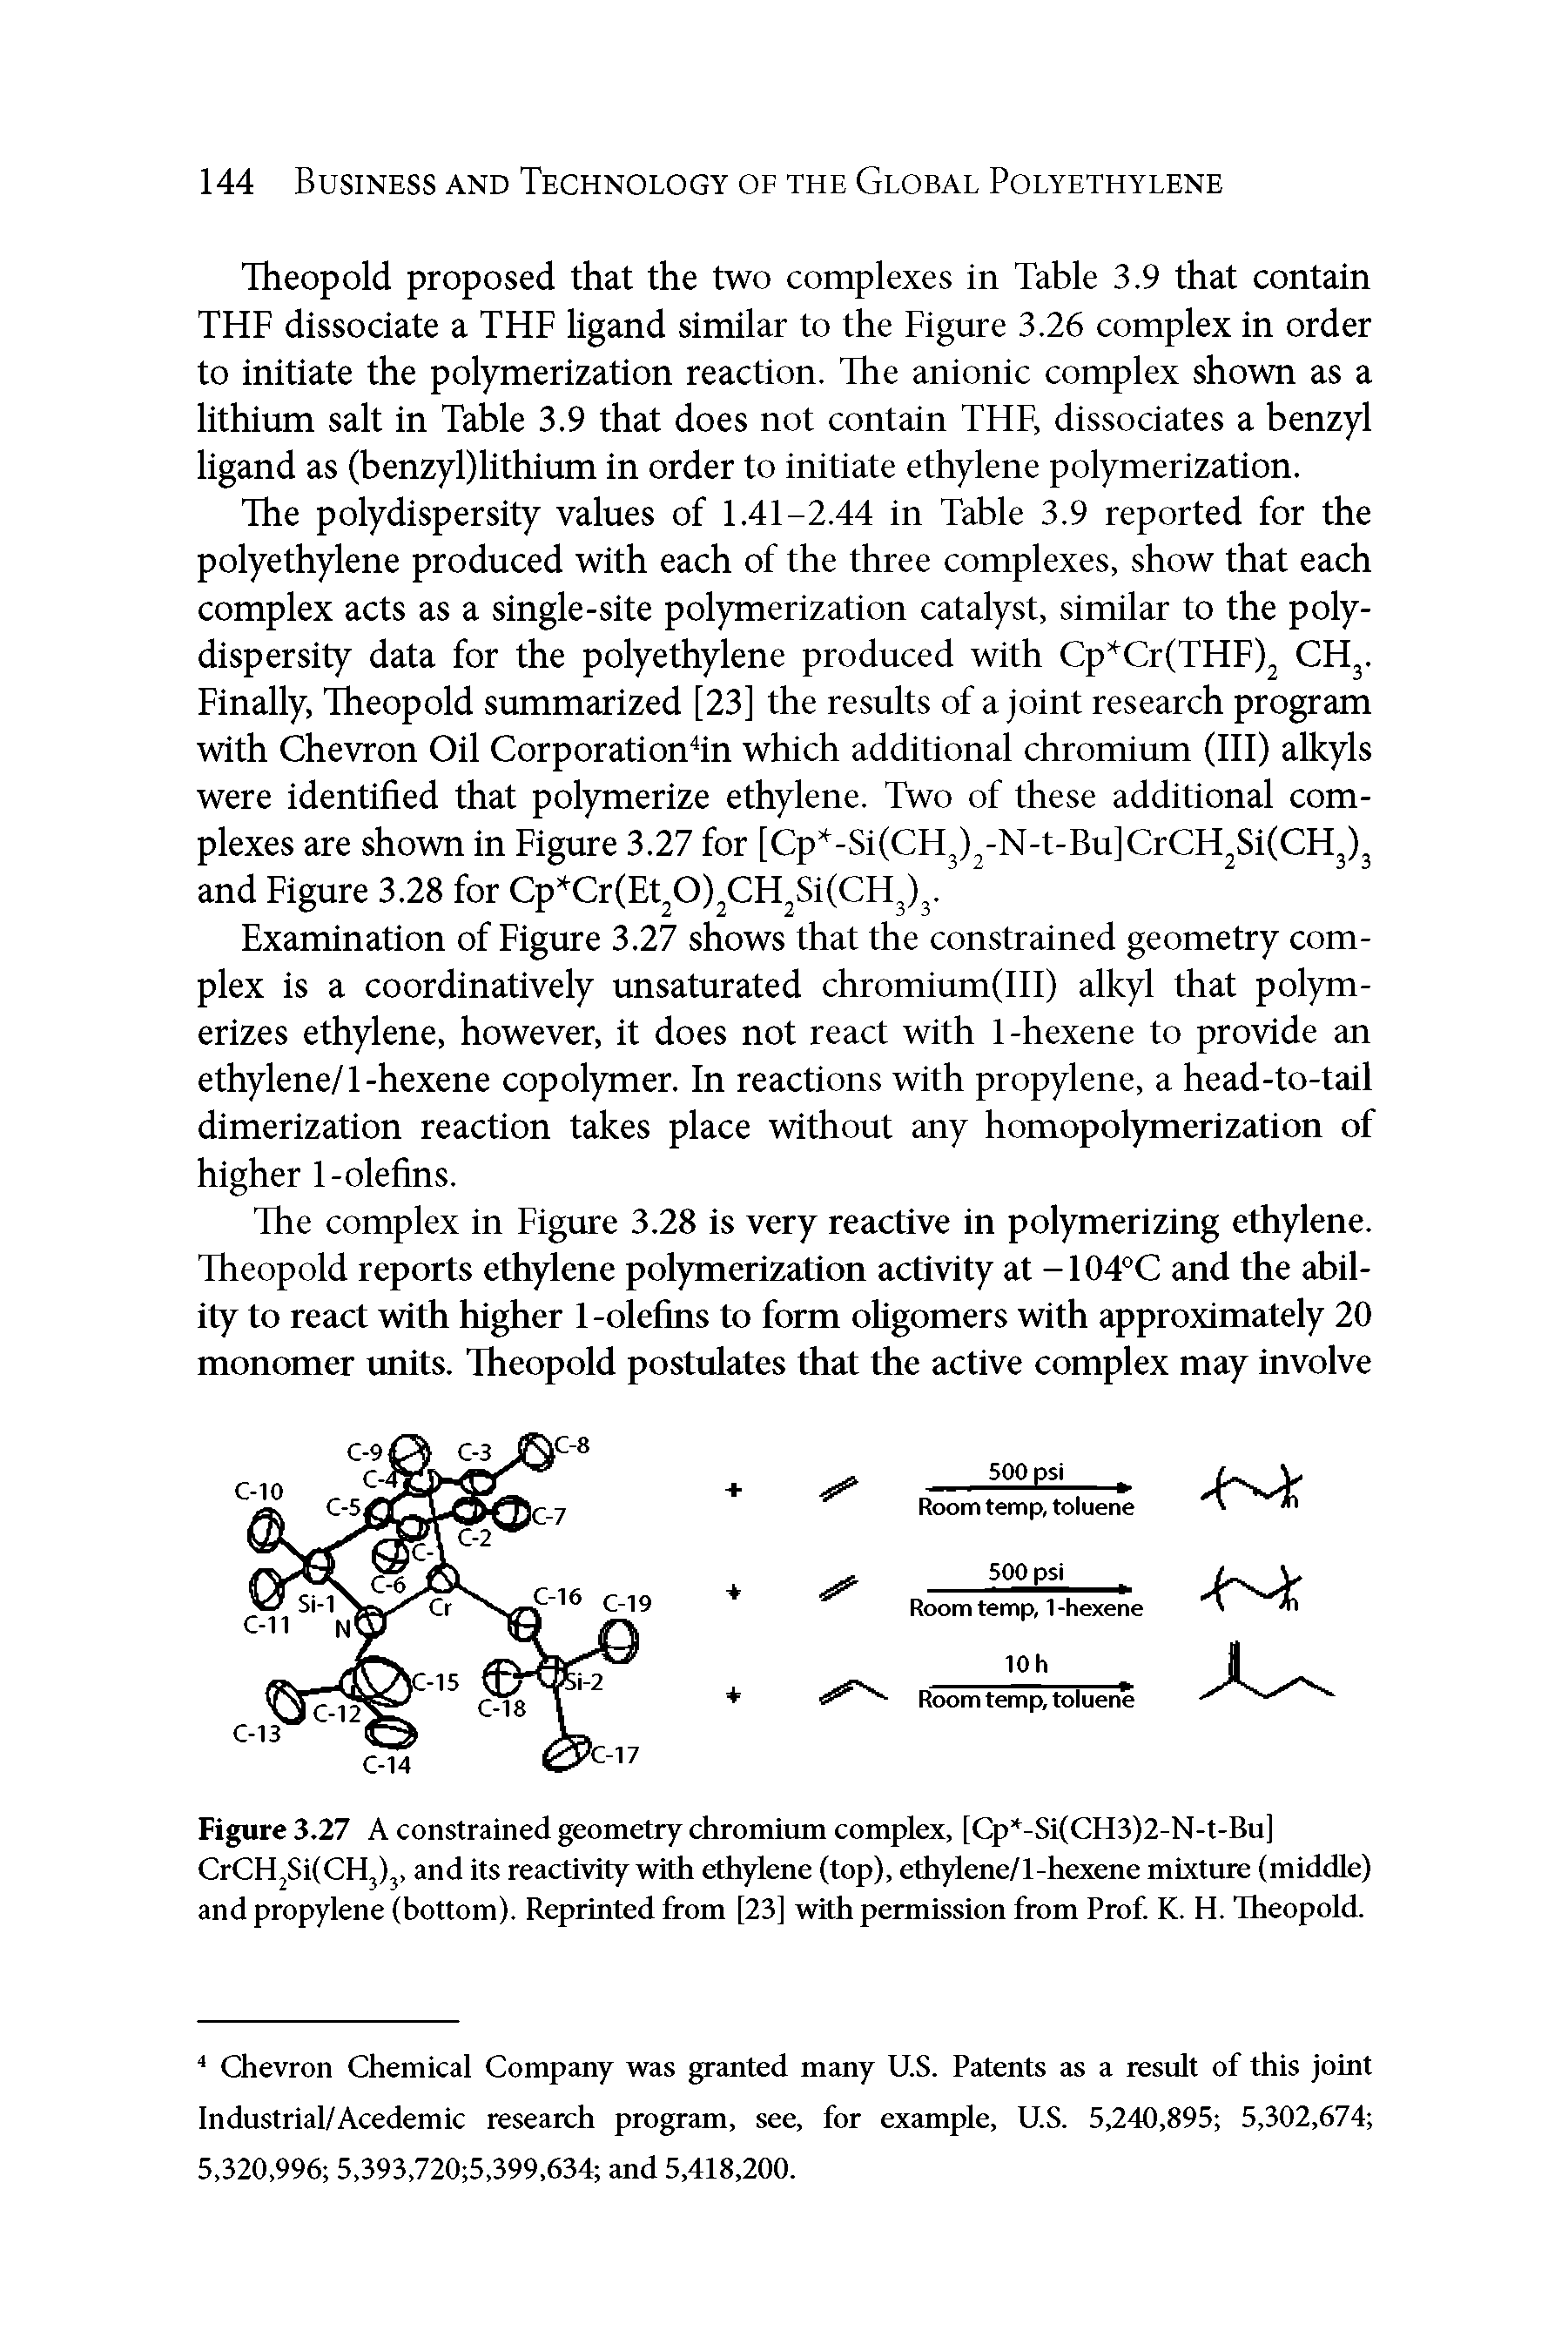 Figure 3.27 A constrained geometry chromium complex, [Cp -Si(CH3)2-N-t-Bu] CrCHjSKCHjlj, and its reactivity with ethylene (top), ethylene/l-hexene mixture (middle) and propylene (bottom). Reprinted from [23] with permission from Prof K. H. Theopold.